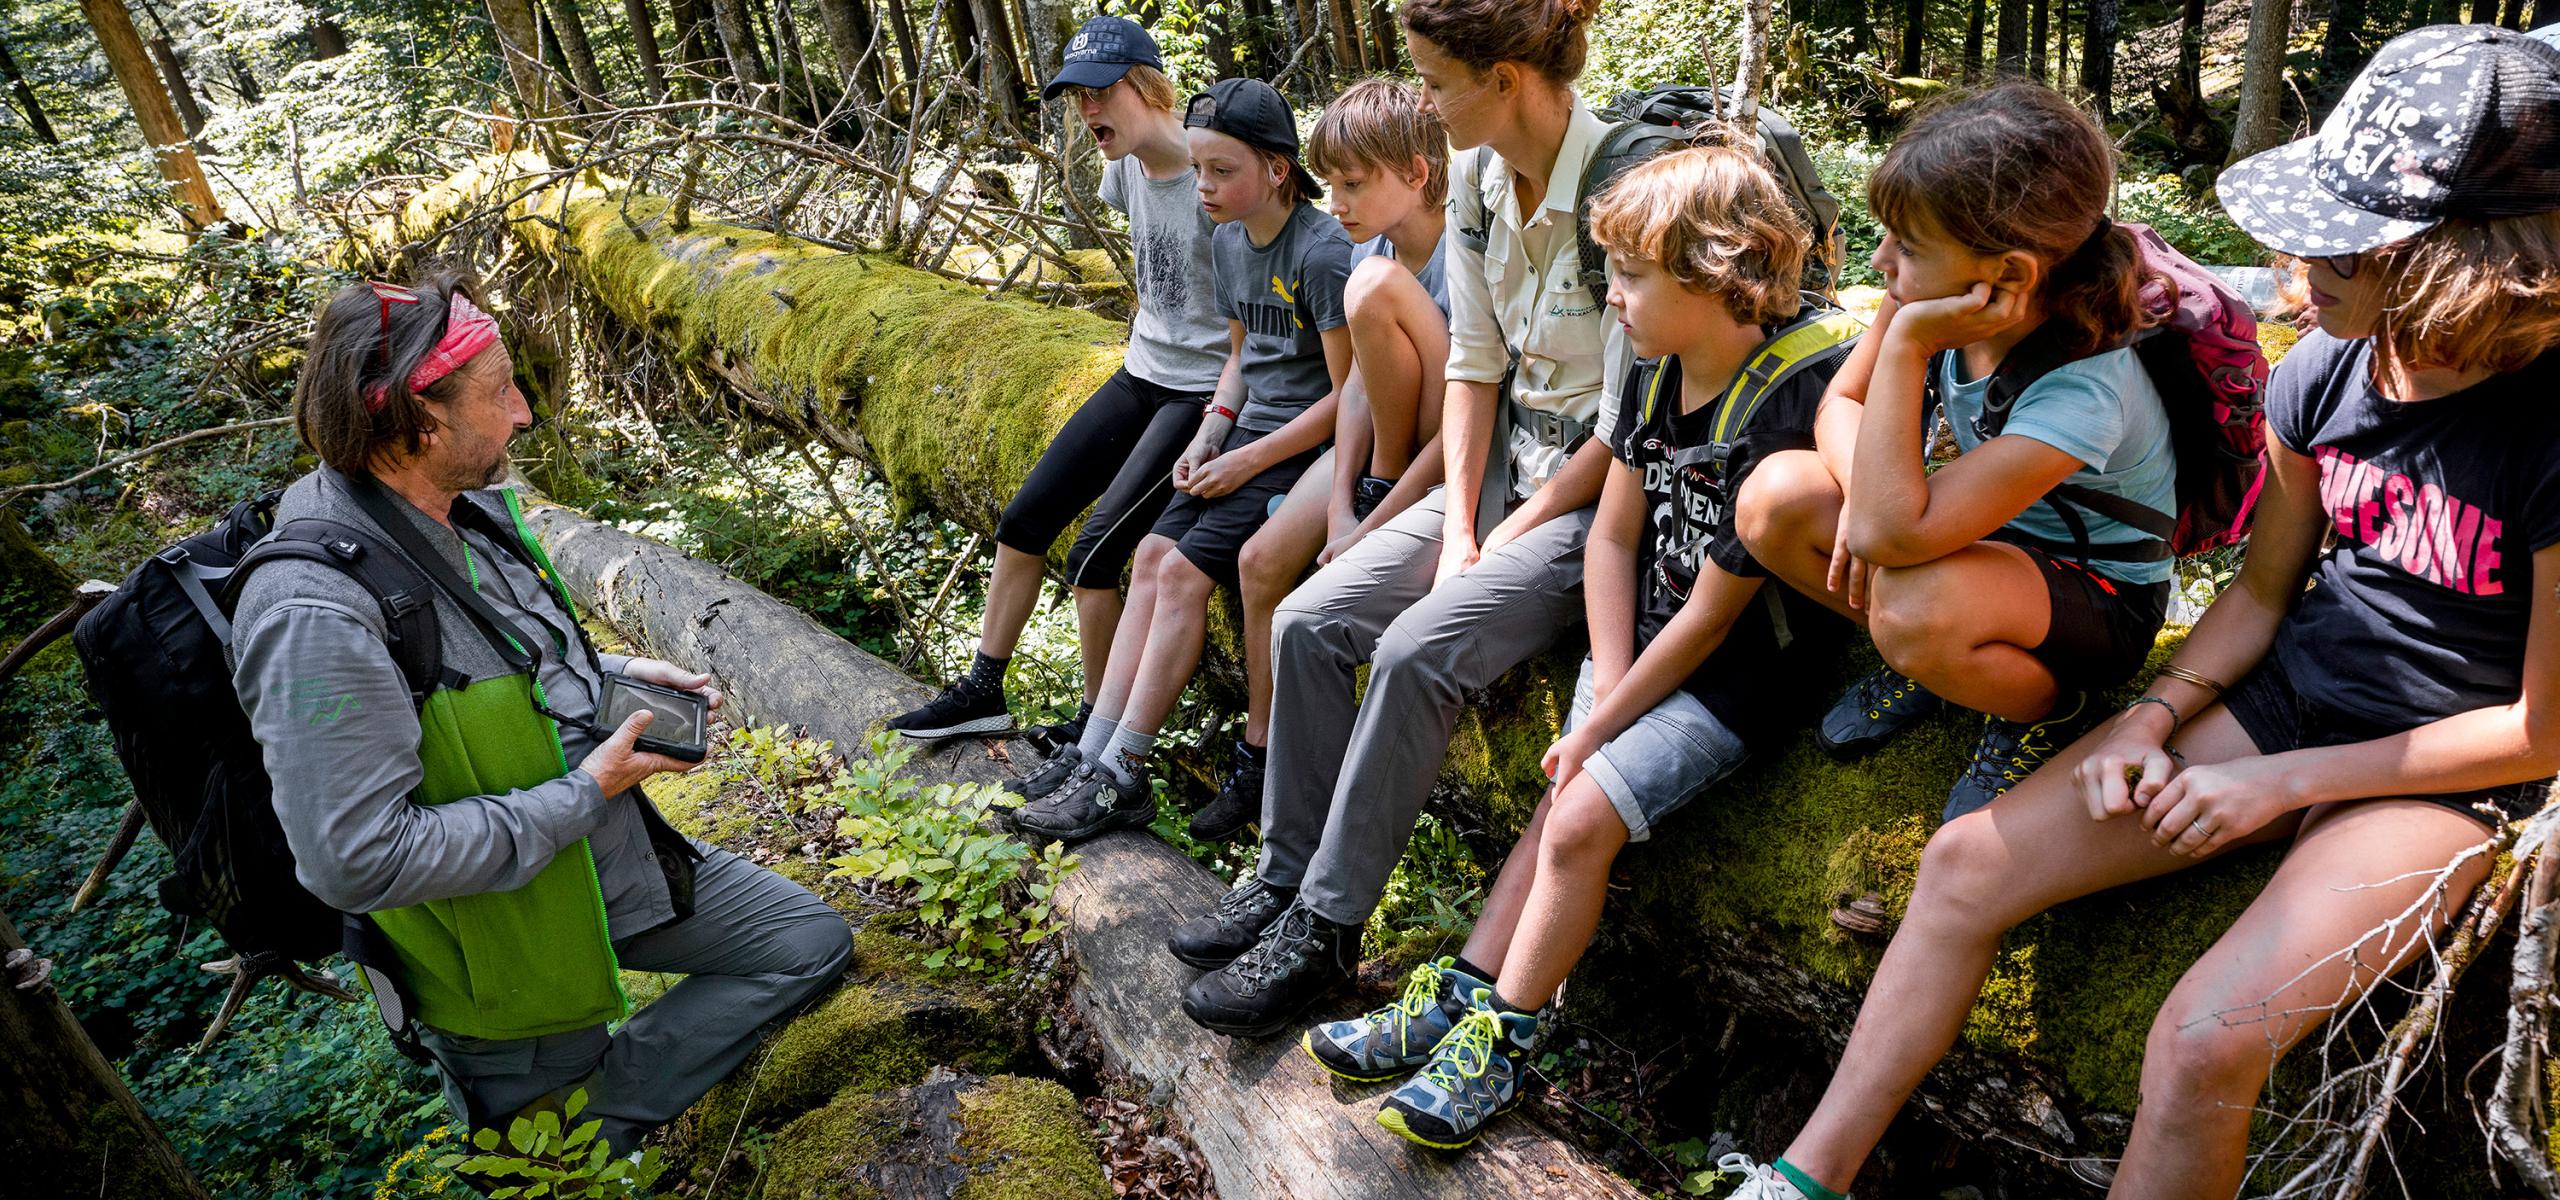 Schoolchildren sit on a mossy tree trunk in the forest and listen to national park rangers